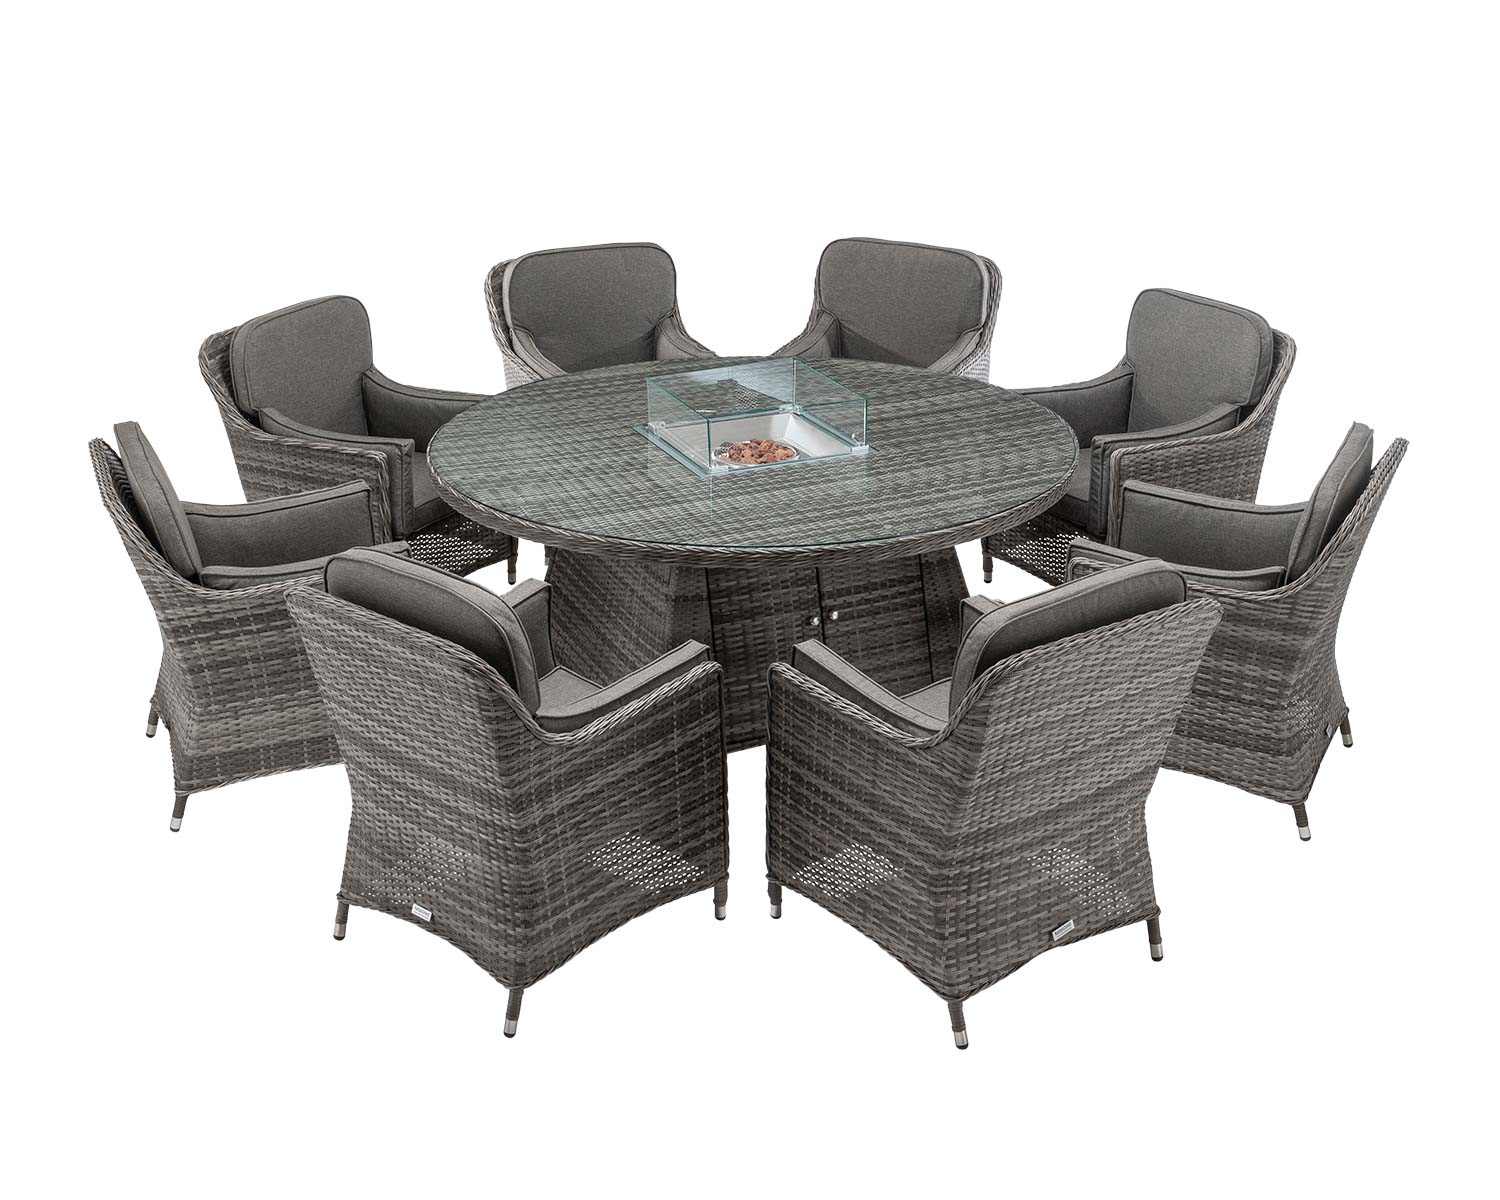 8 Seater Rattan Garden Dining Set With Large Round Table In Grey With Fire Pit Lyon Rattan Direct